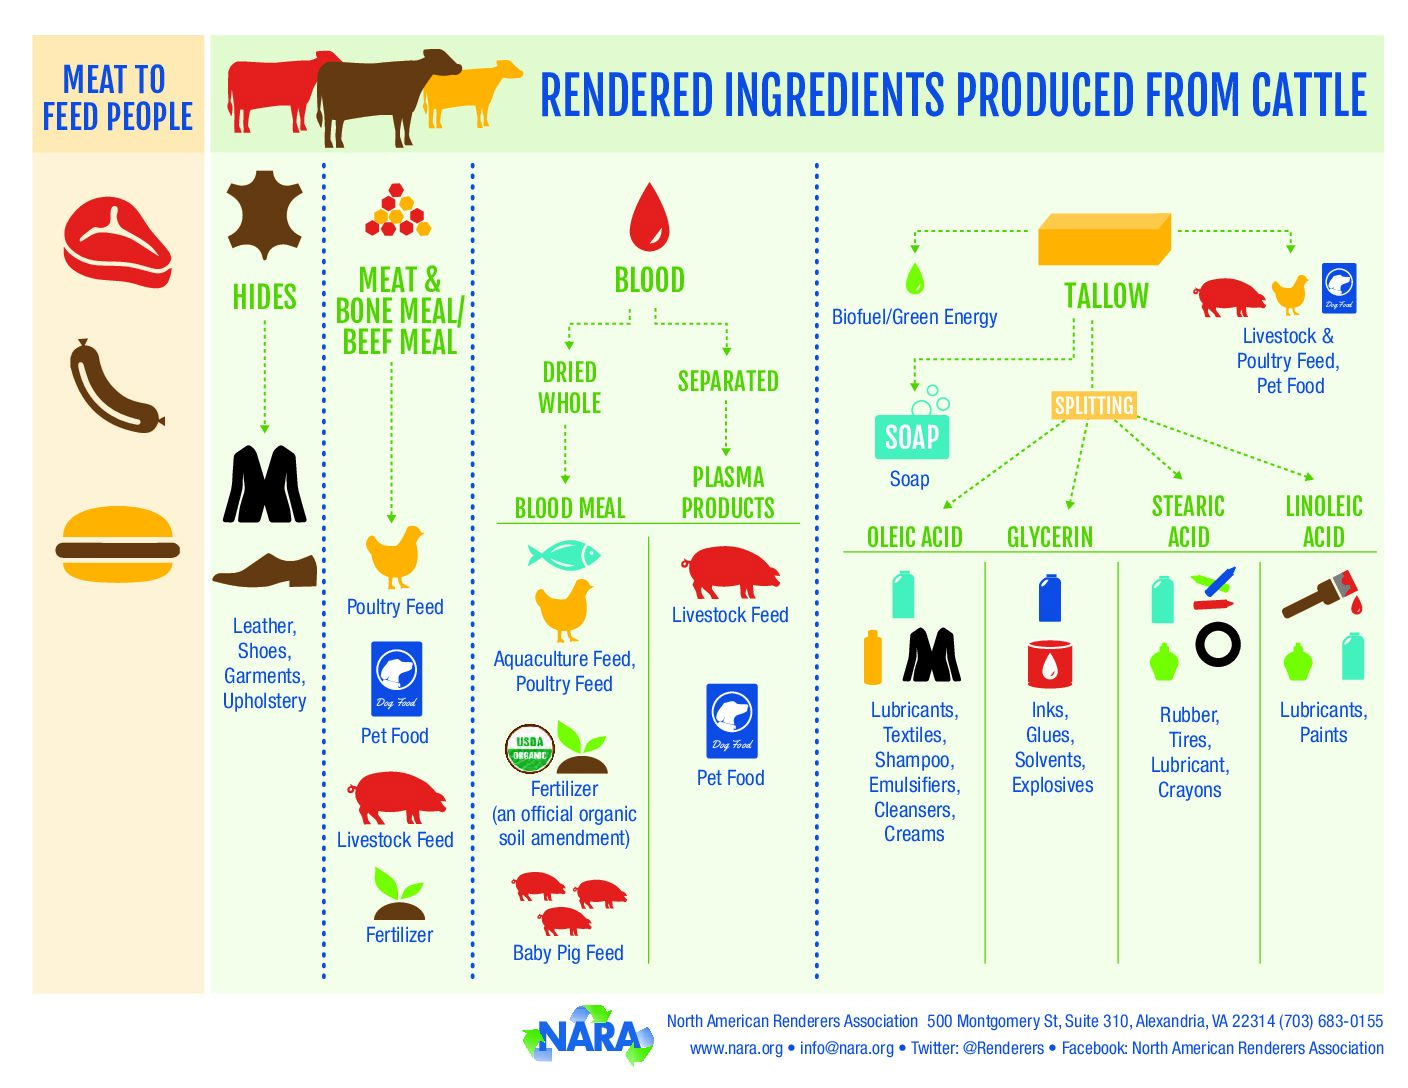 Rendering Ingredients: Produced from Cattle